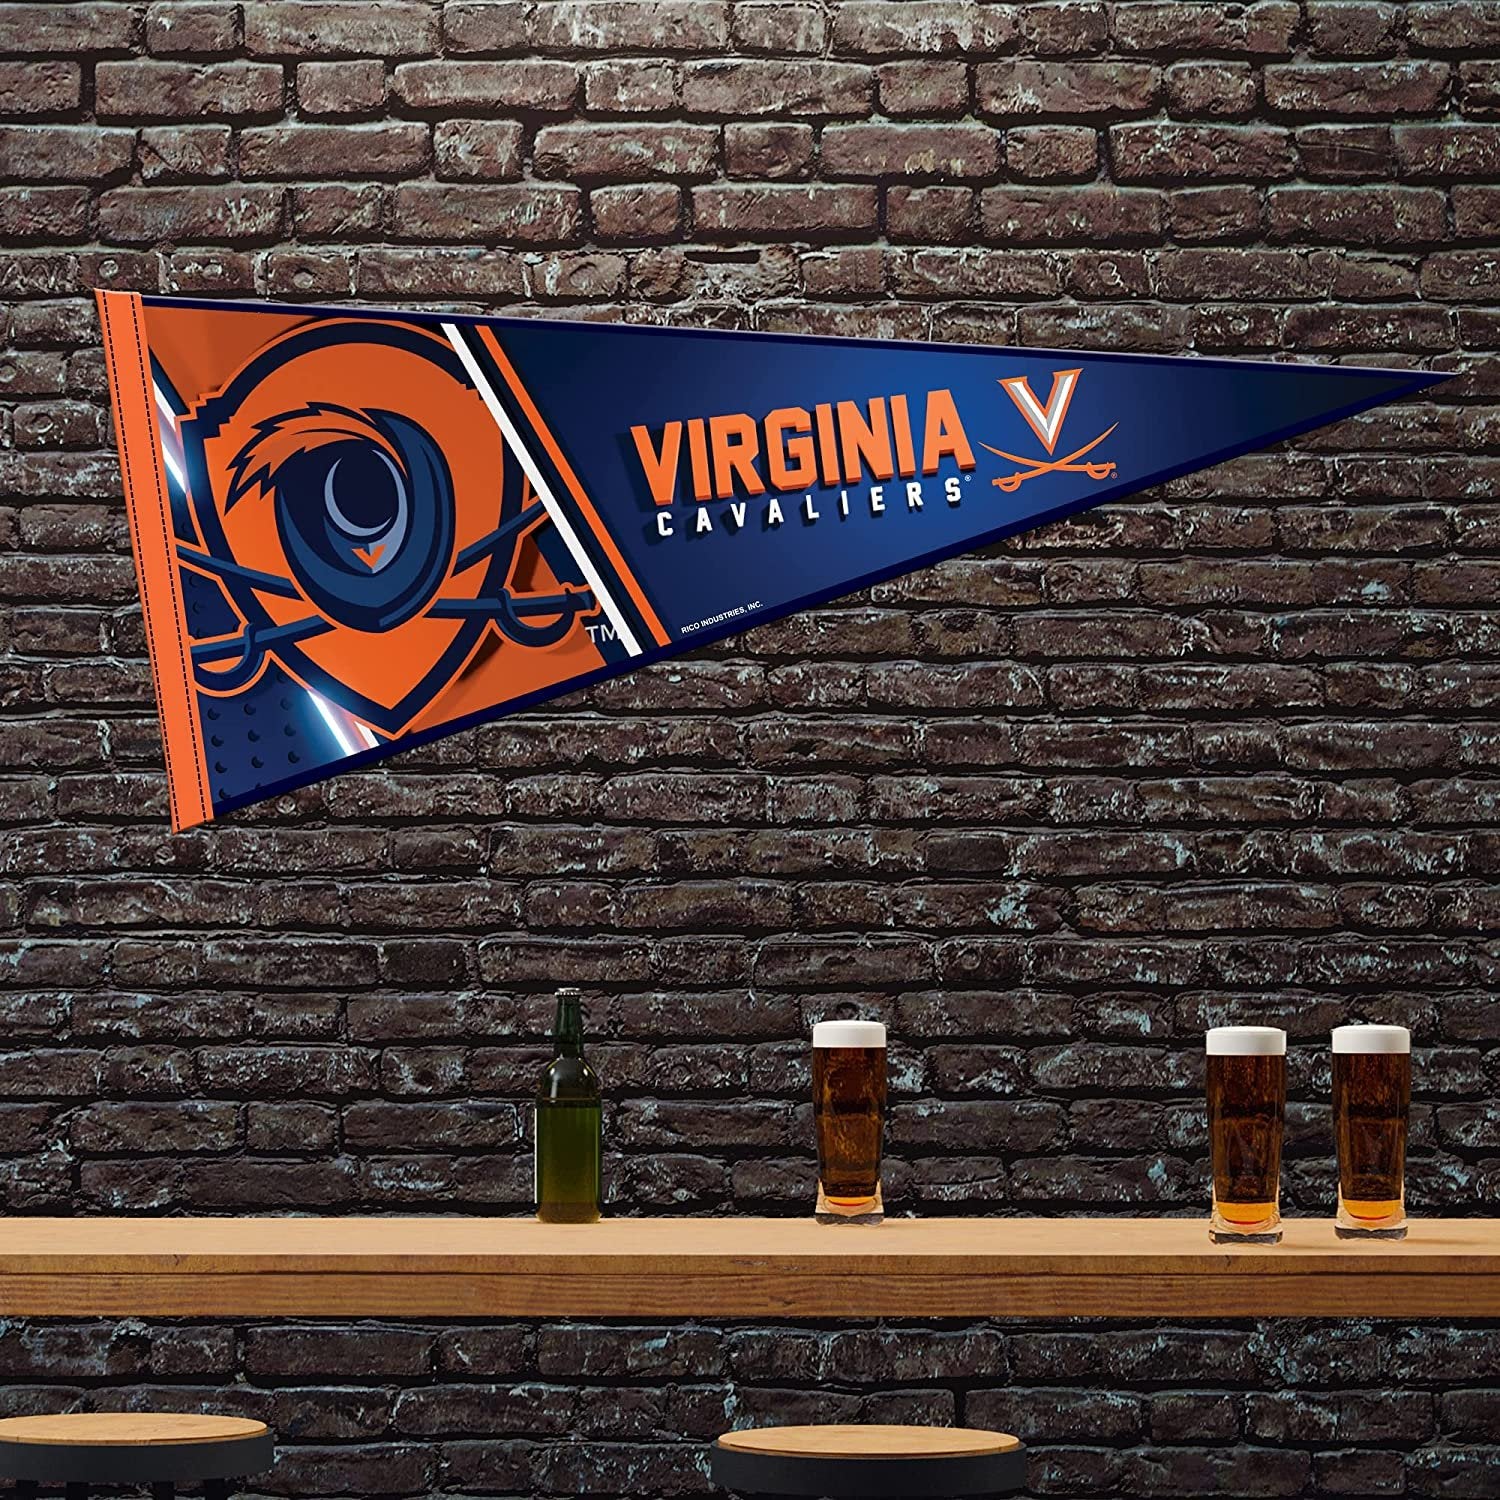 University of Virginia Cavaliers Soft Felt Pennant, Primary Design, 12x30 Inch, Easy To Hang